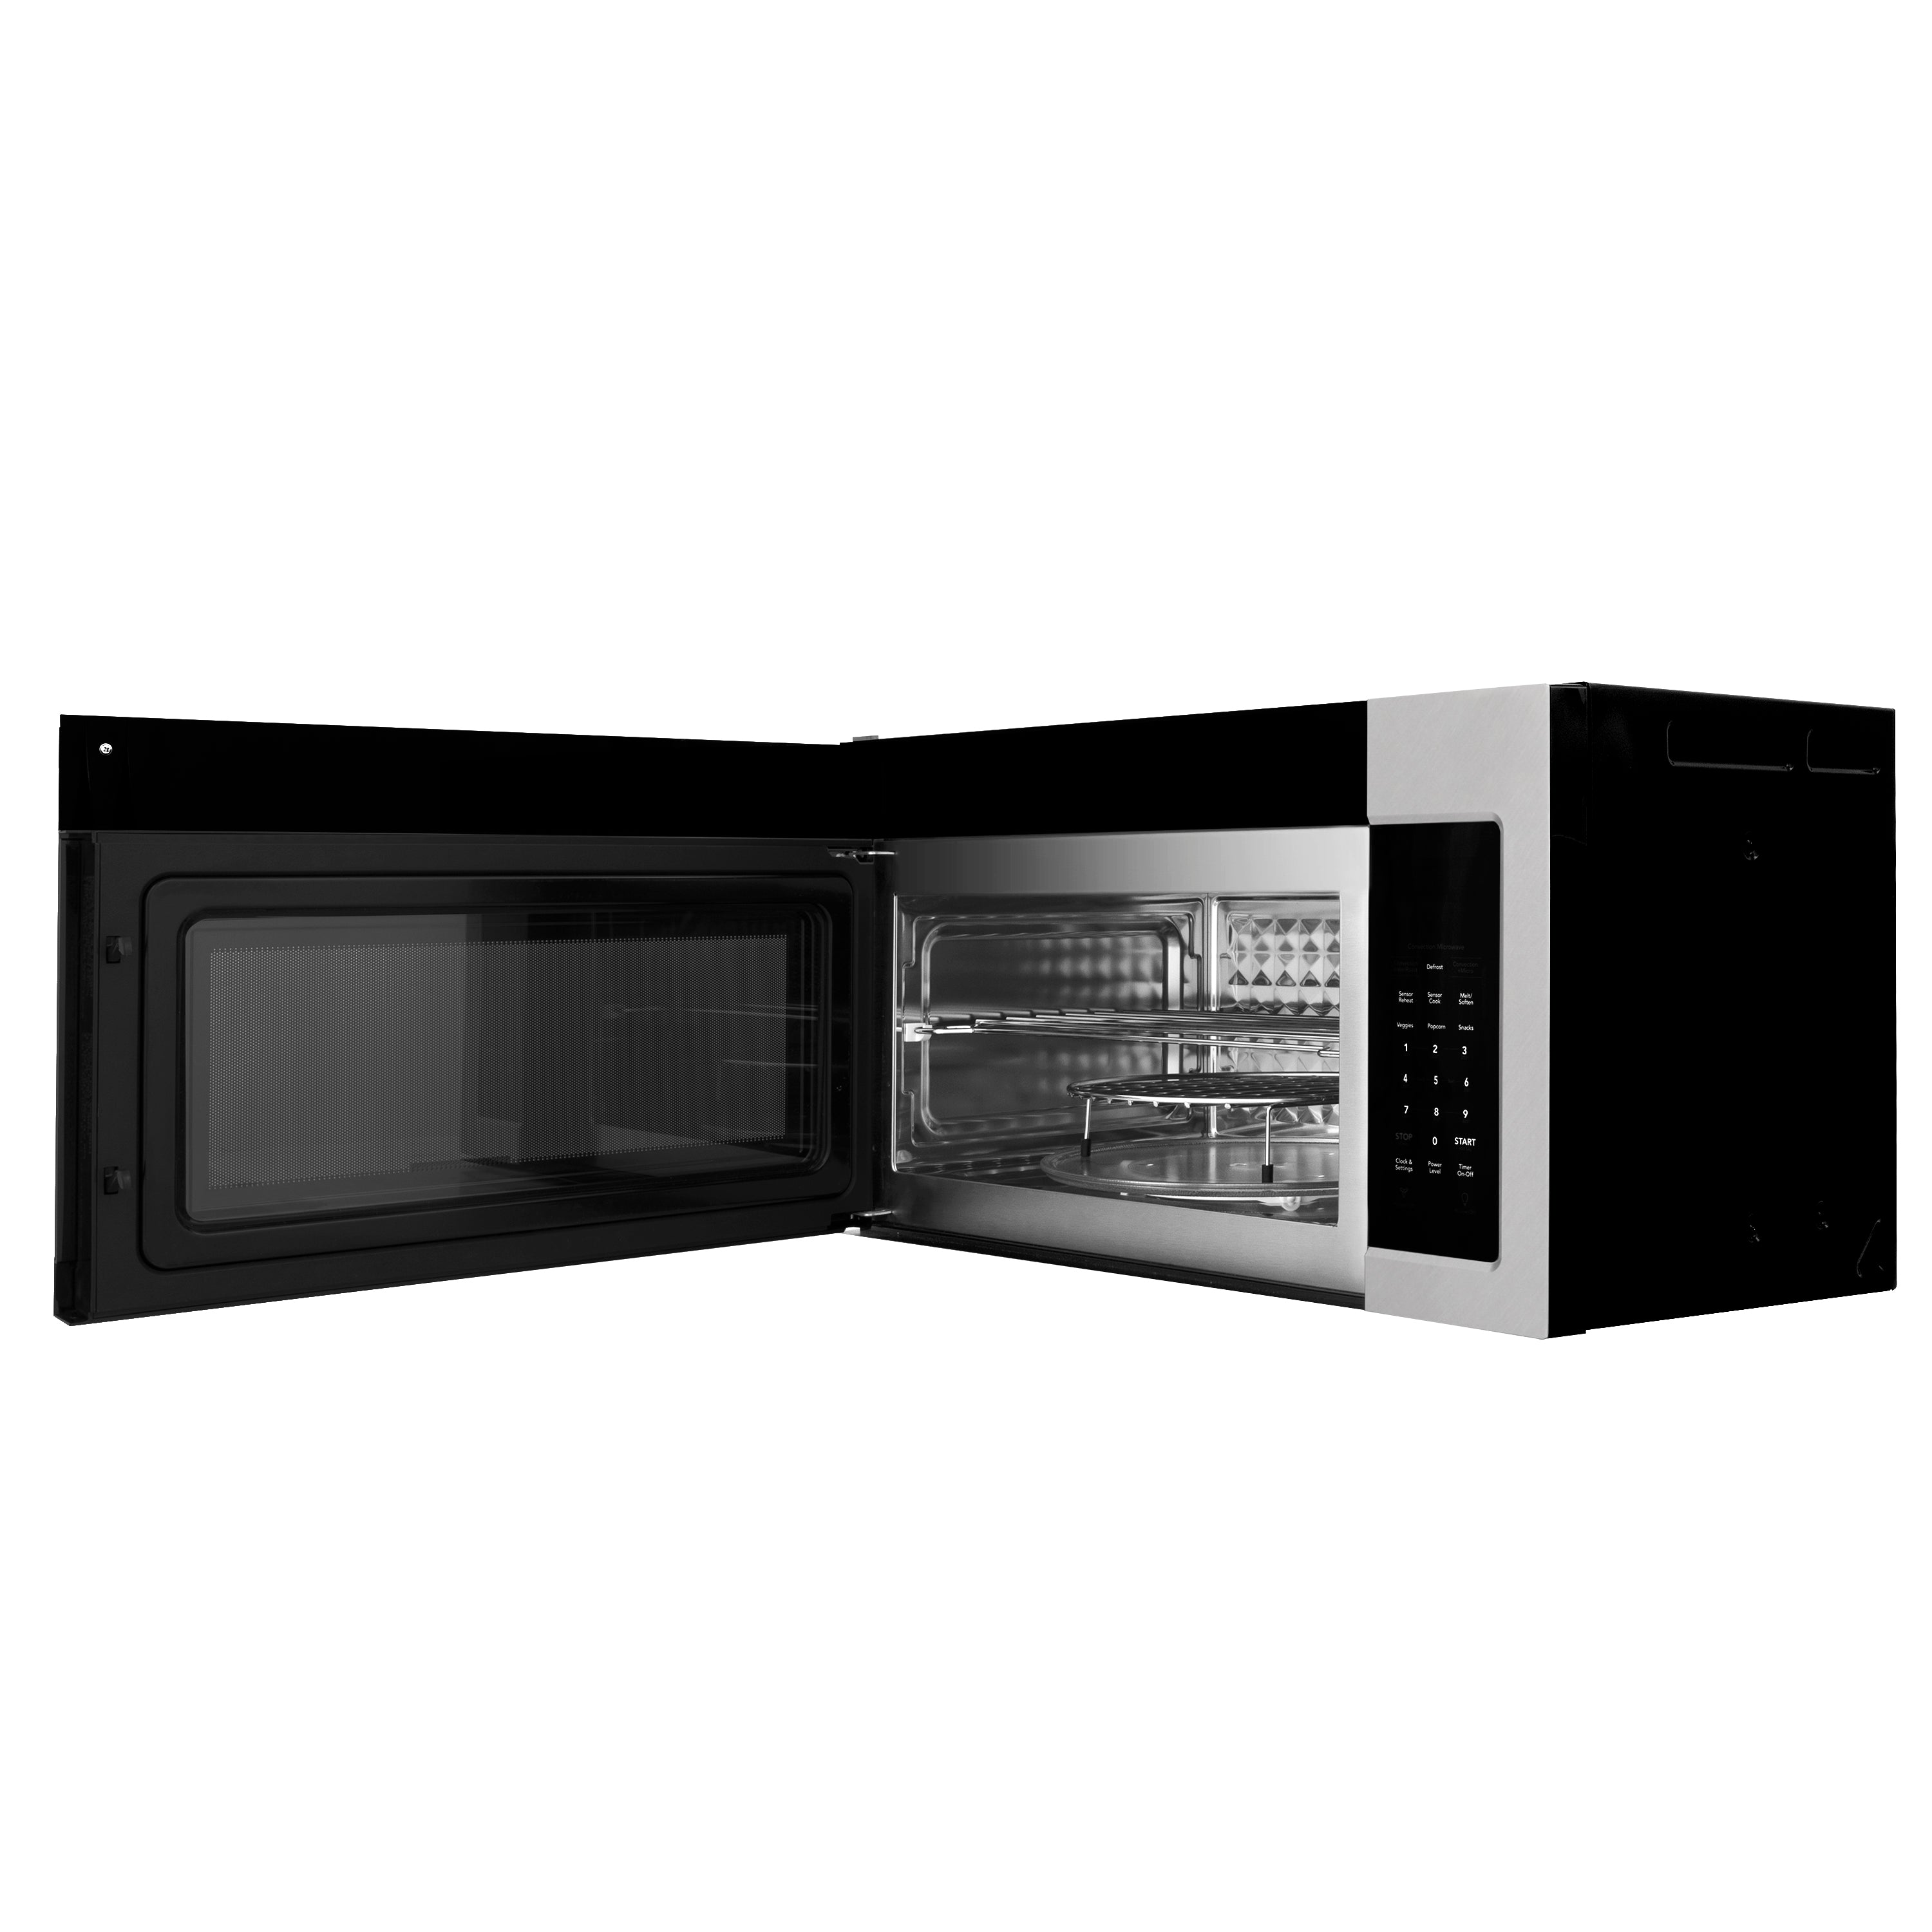 ZLINE 30 in. Over the Range Convection Microwave Oven with Traditional Handle in Fingerprint Resistant Stainless Steel (MWO-OTR-H-SS) Side View Door Open